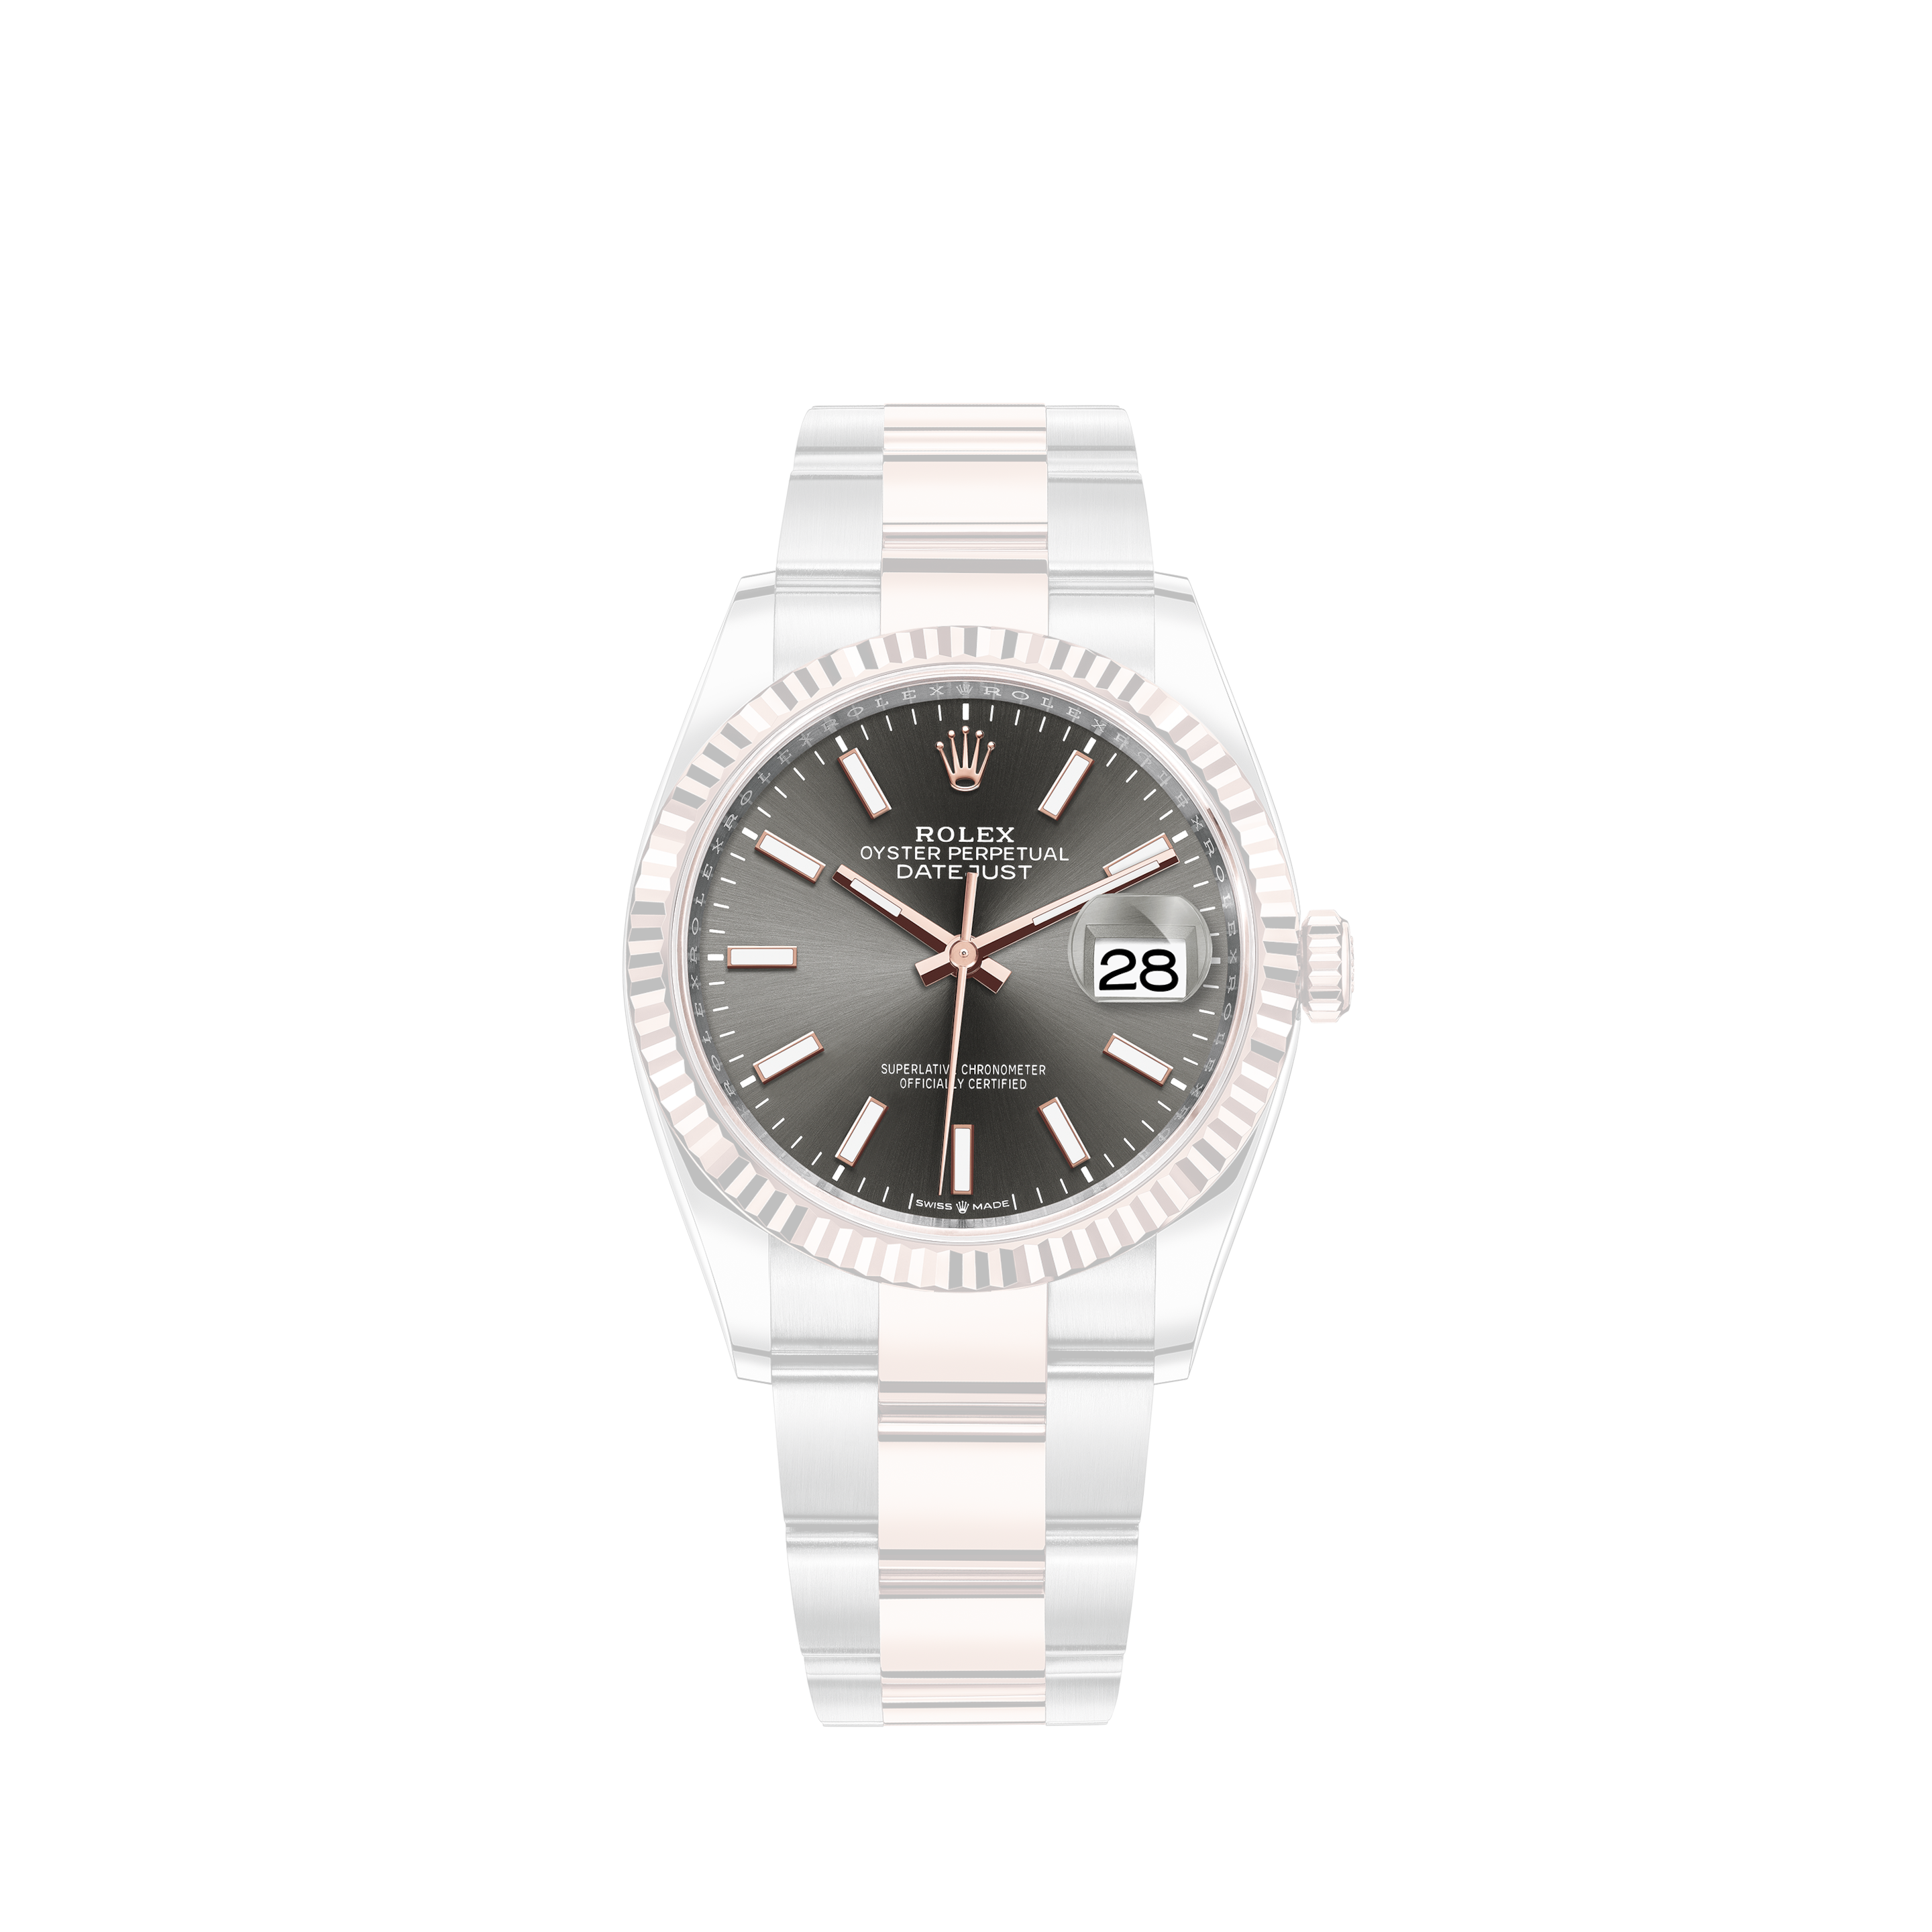 Rolex Oyster Perpetual Date 15010Rolex Oyster Perpetual Date 15010 34mm Stainless Silver Watch DateJust 15000